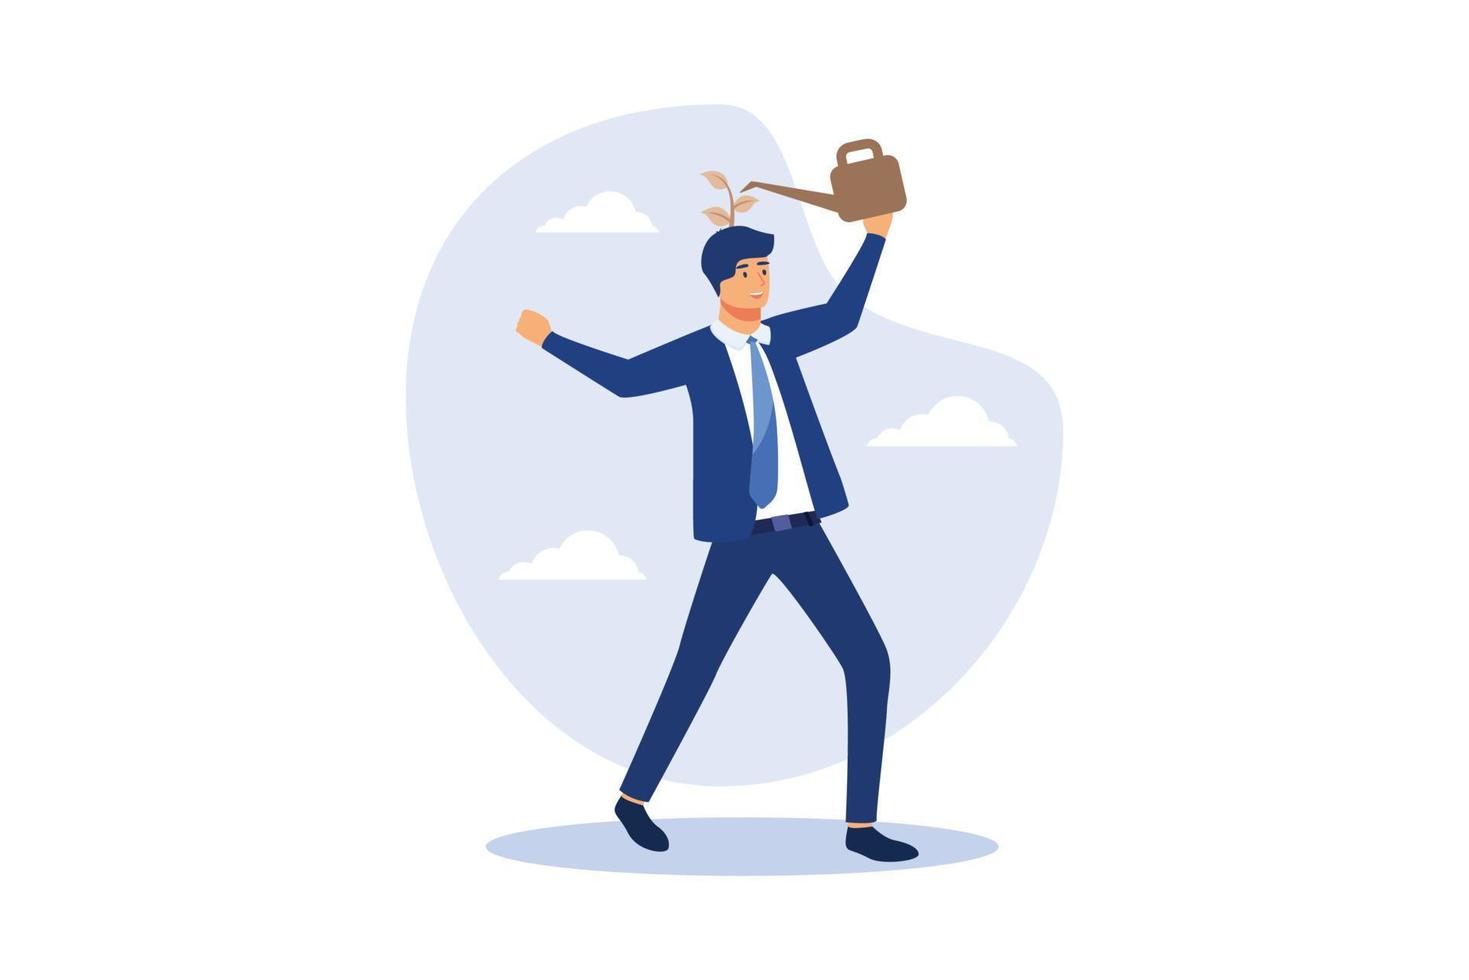 Self improvement, growth mindset, positive attitude to learn new knowledge improve creativity for business problem concept, smart businessman using watering can to water growing seedling on his head. vector